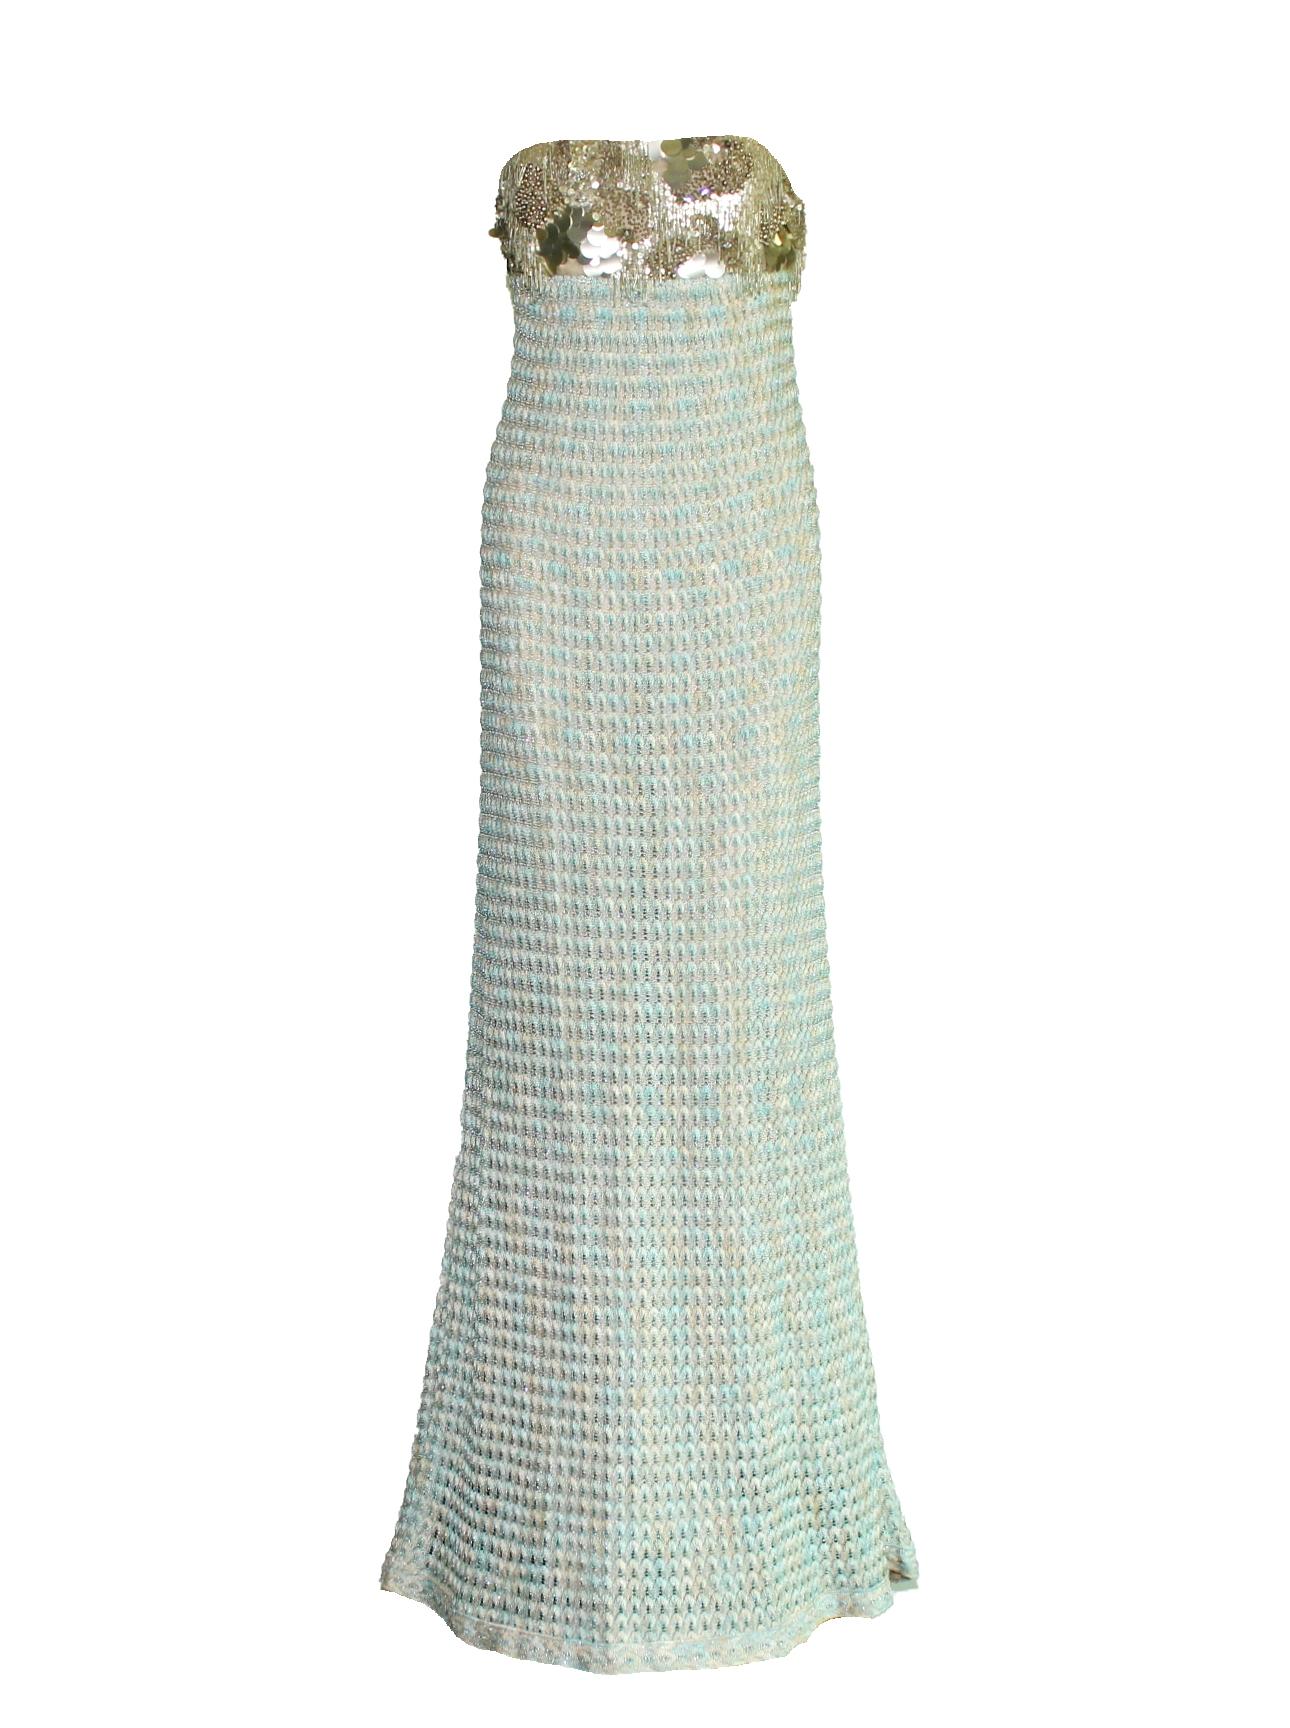 A stunning evening gown by MISSONI - a rare find!
Perfect for the festive season
Full length
Babyblue color with metallic silver lurex threads
Bustier corset top
Embellished top with sequins, pearls and crystals
Beautiful MISSONI signature